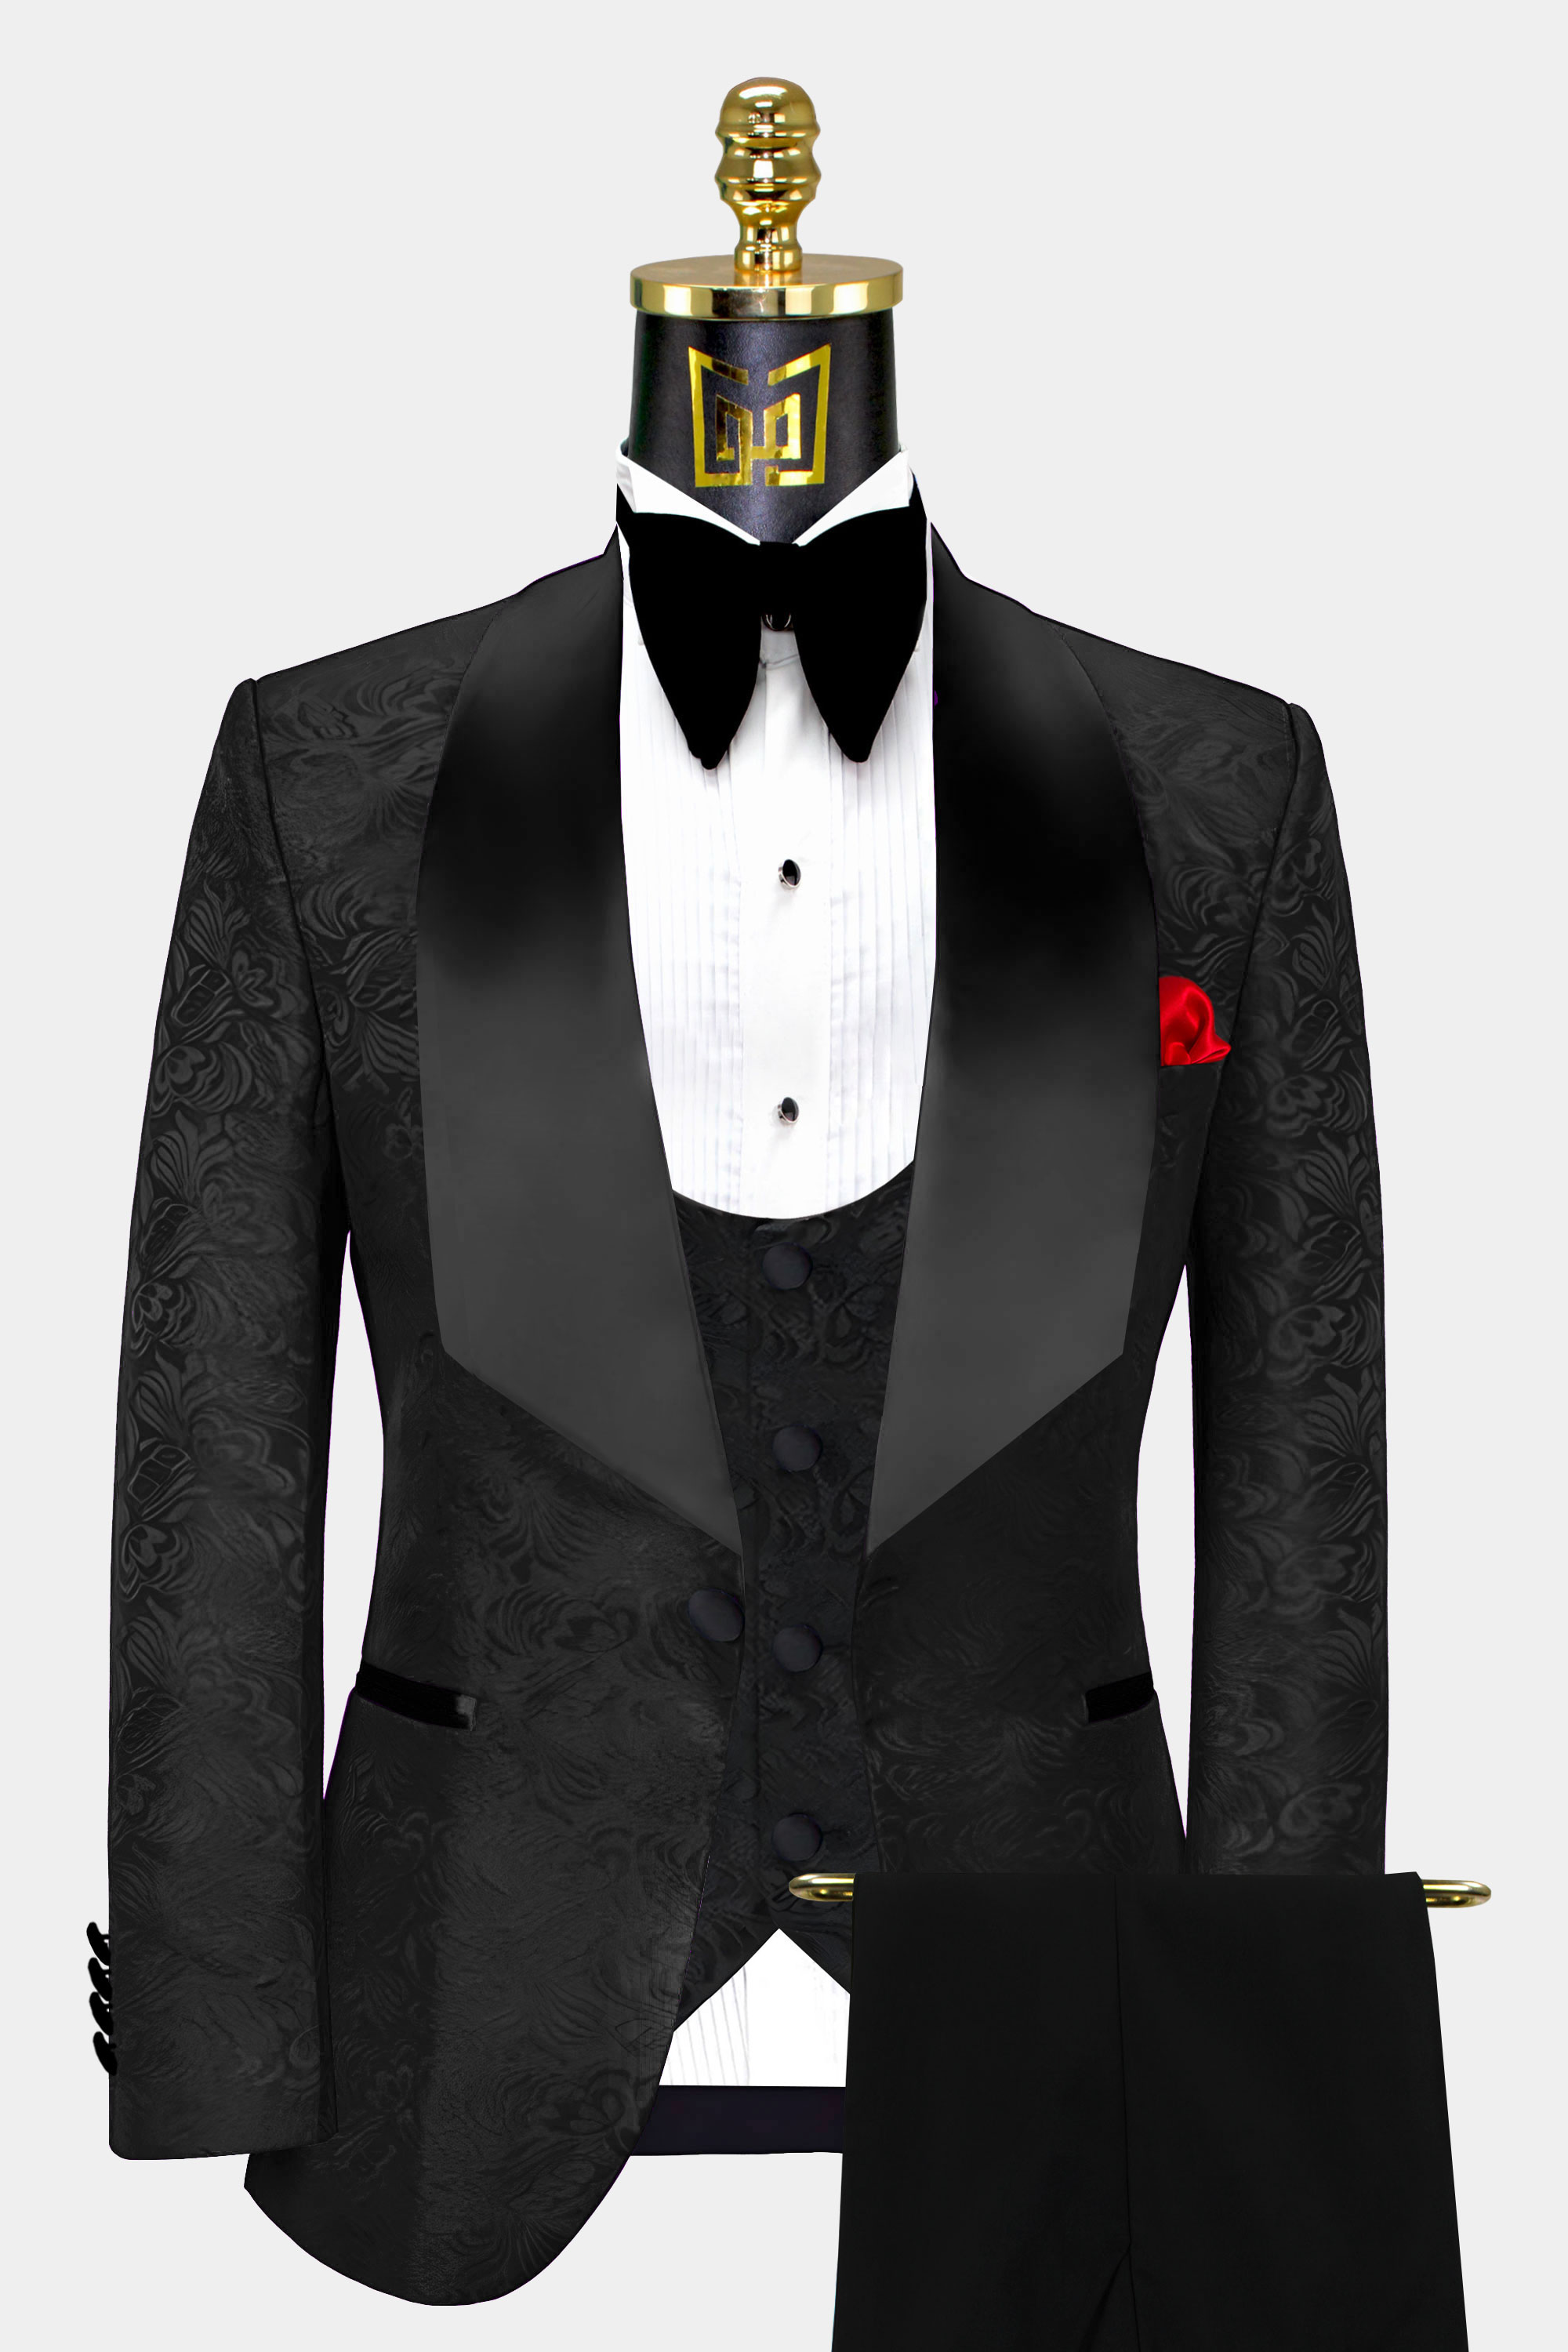 7 Outfit Options for the Groom  Black suit wedding, Wedding suits men  black, Wedding suits groom